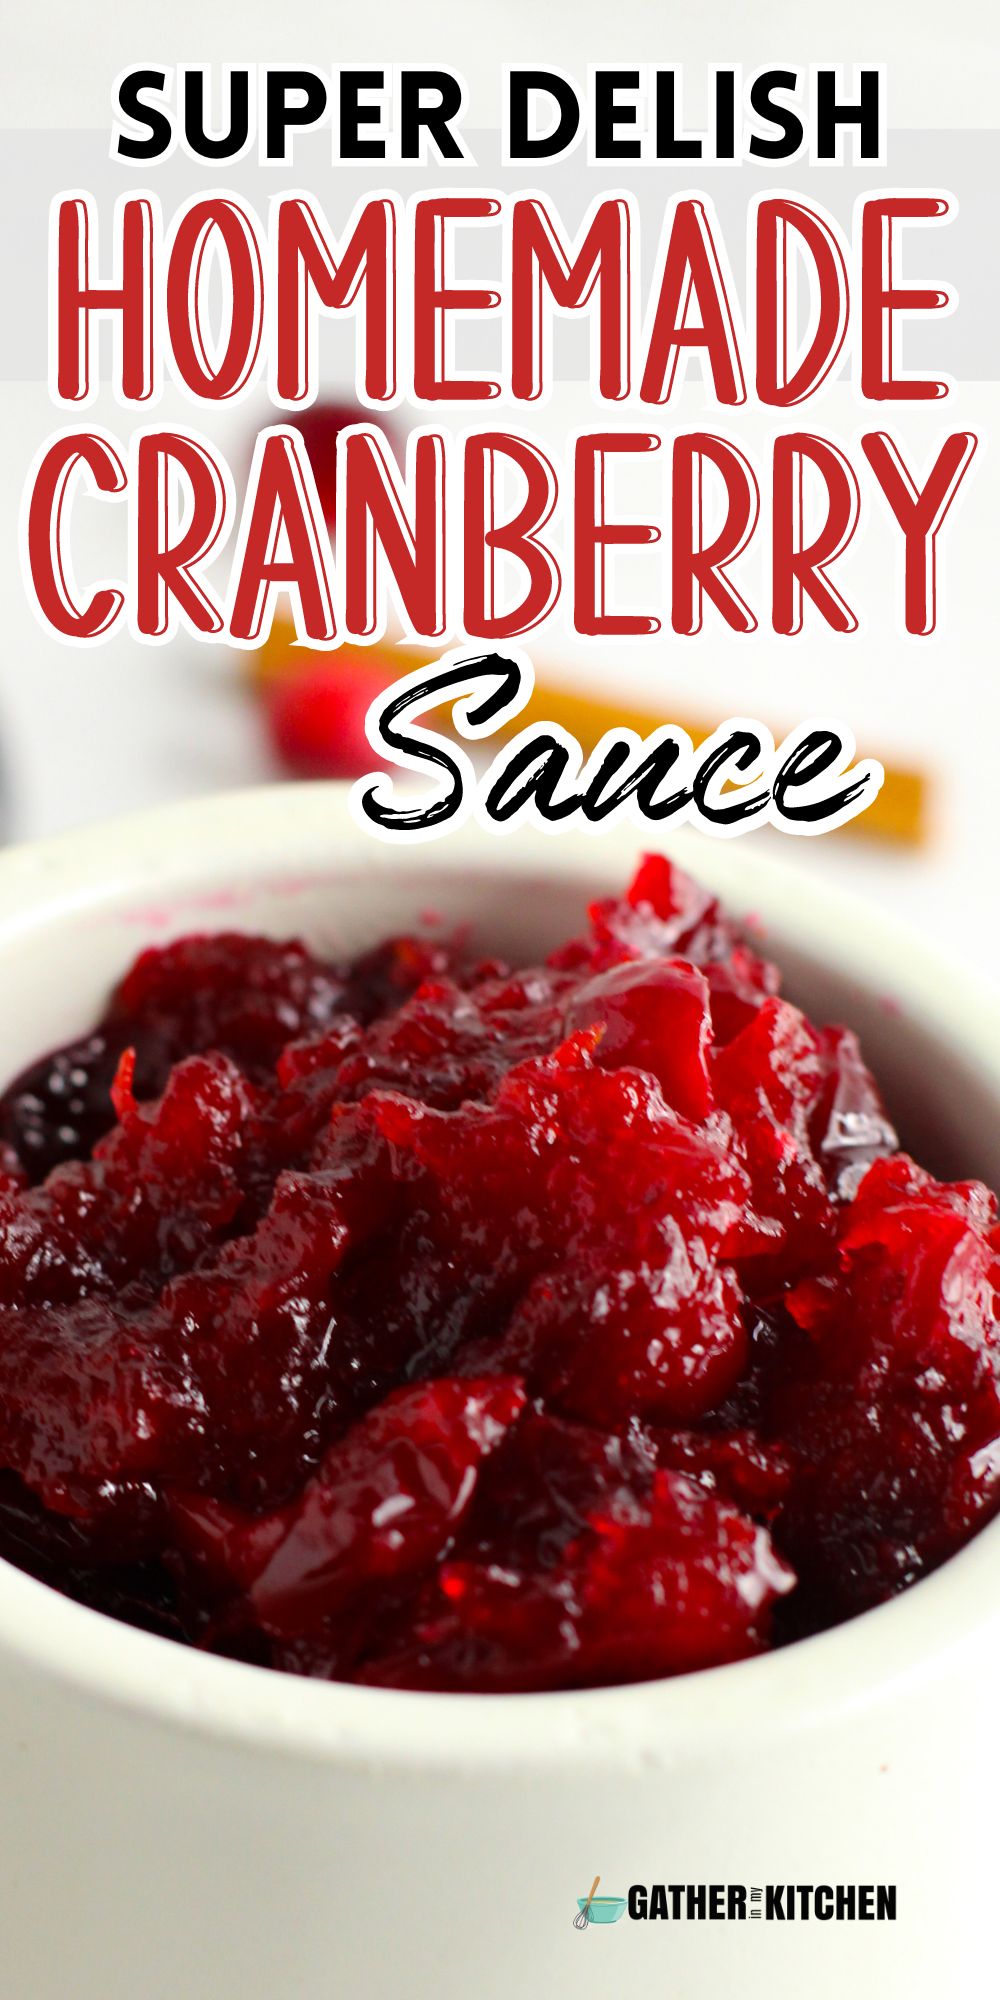 Pin image: top says "Super Delish Homemade Cranberry Sauce" and it's overlaid over a closeup image of cranberry sauce in a white bowl.